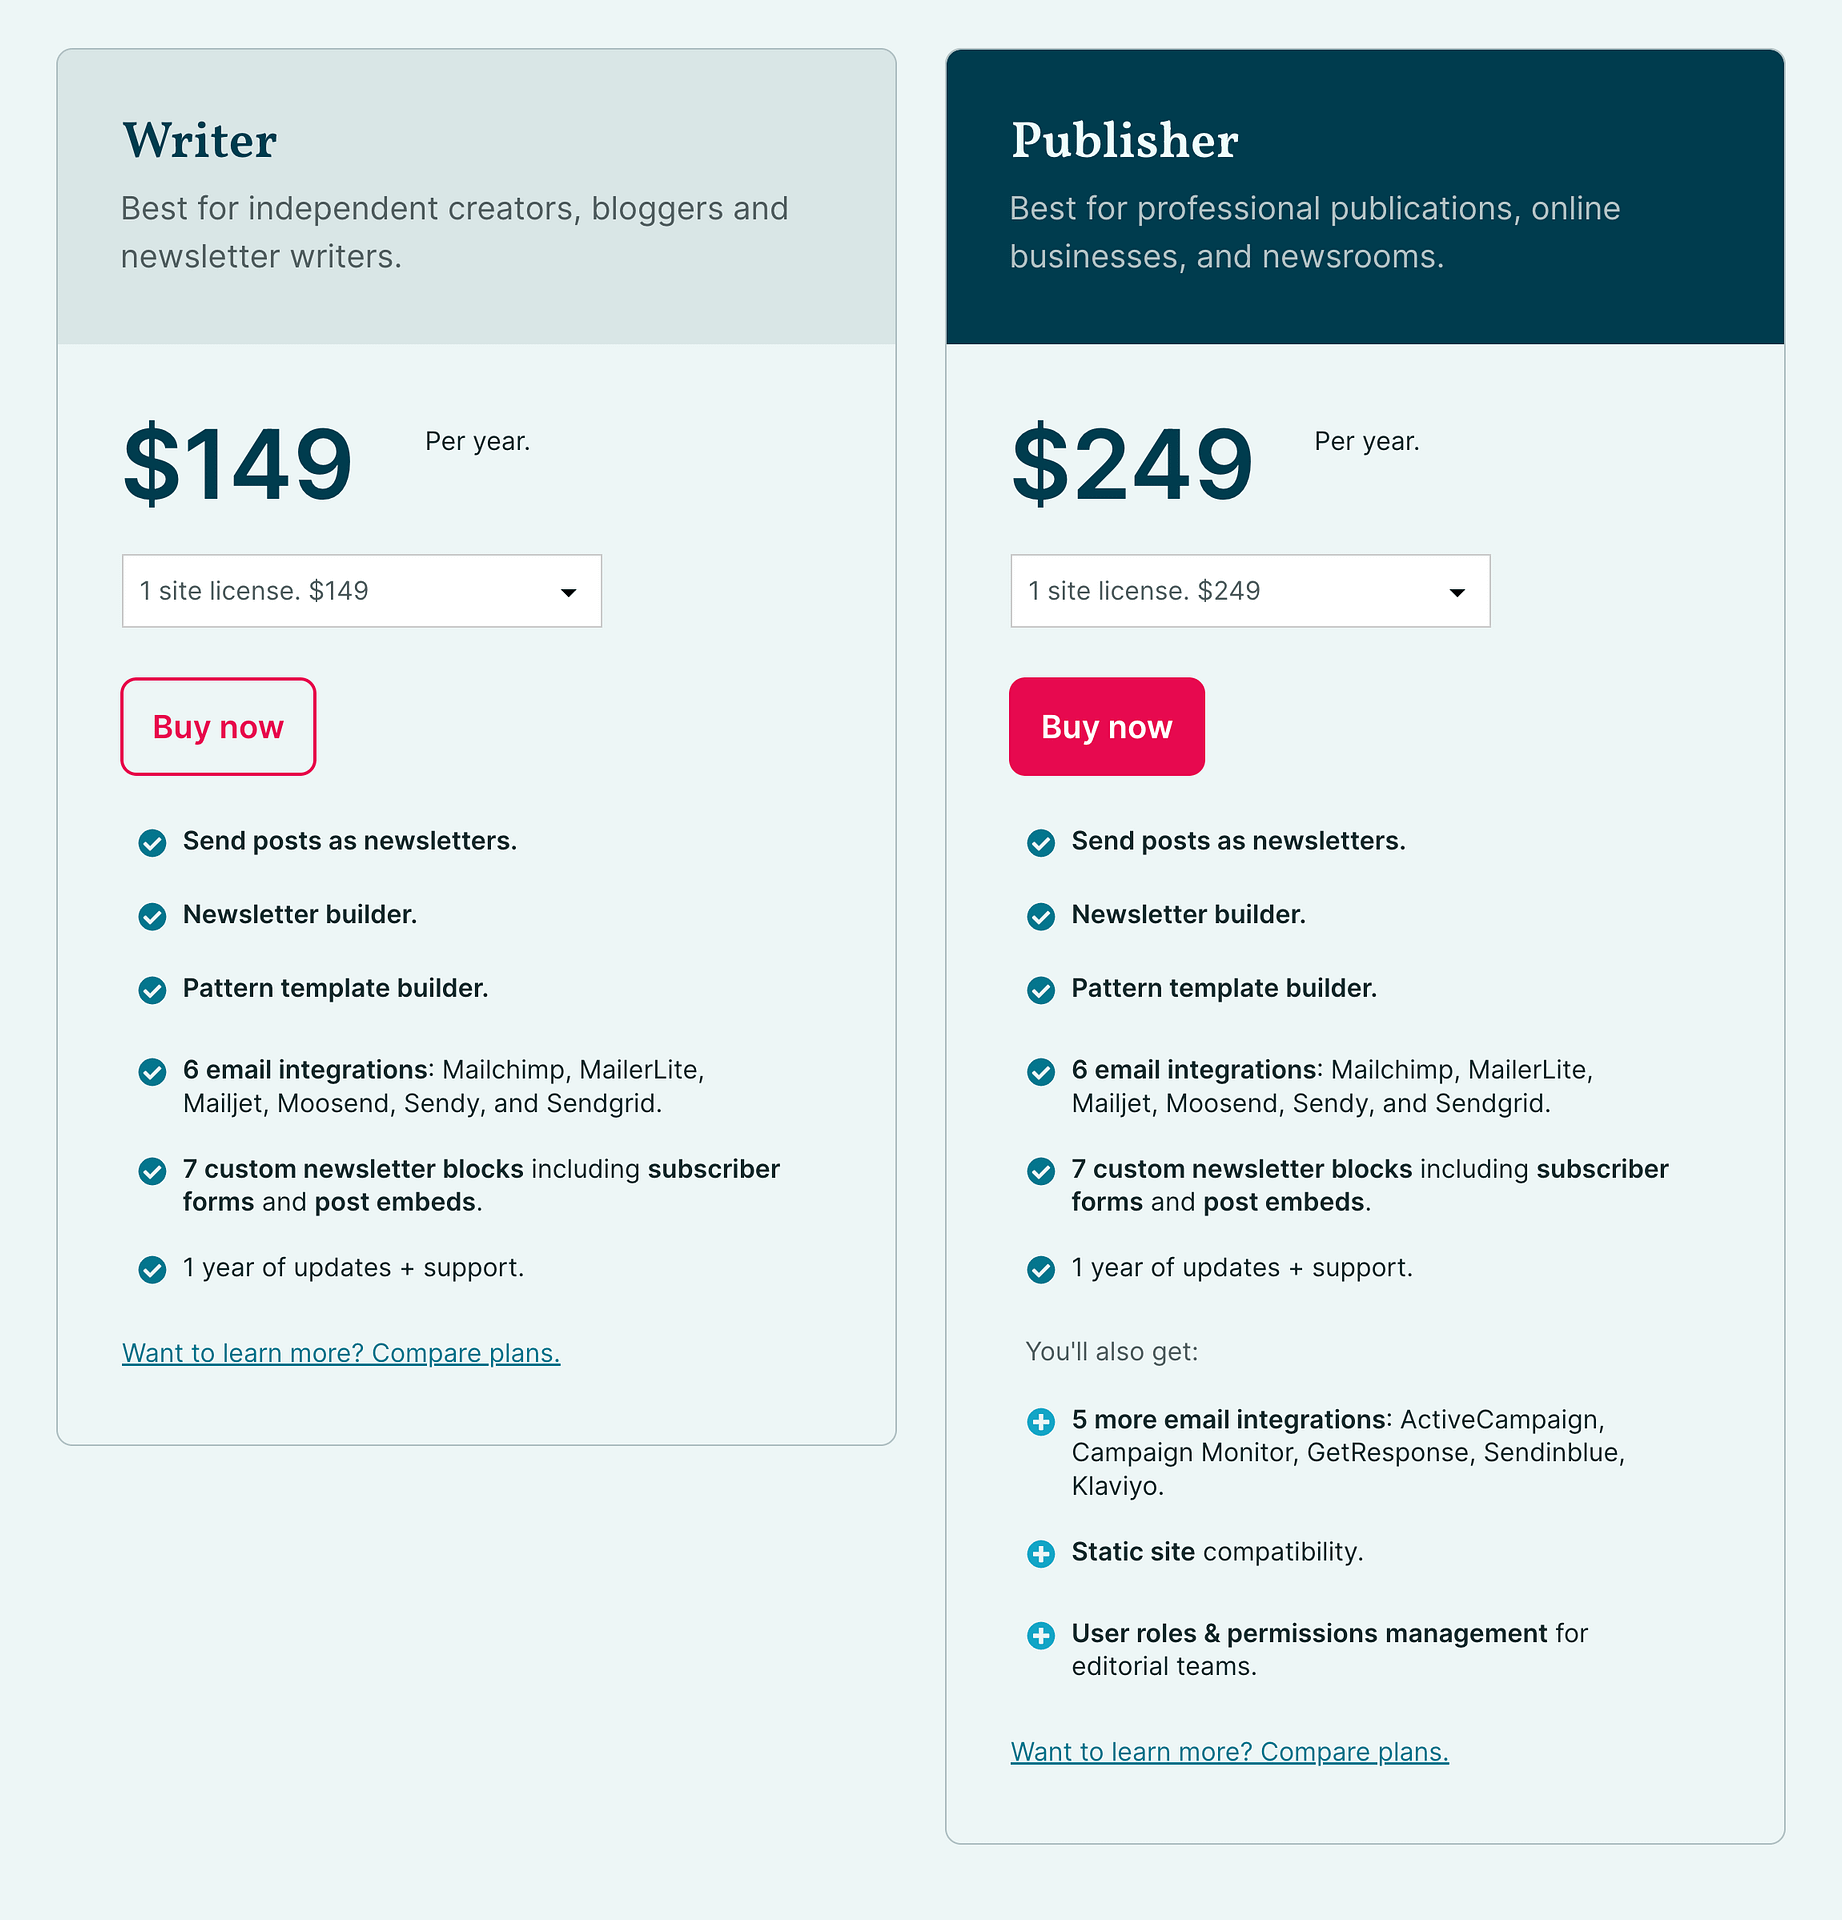 Introducing our new pricing plans